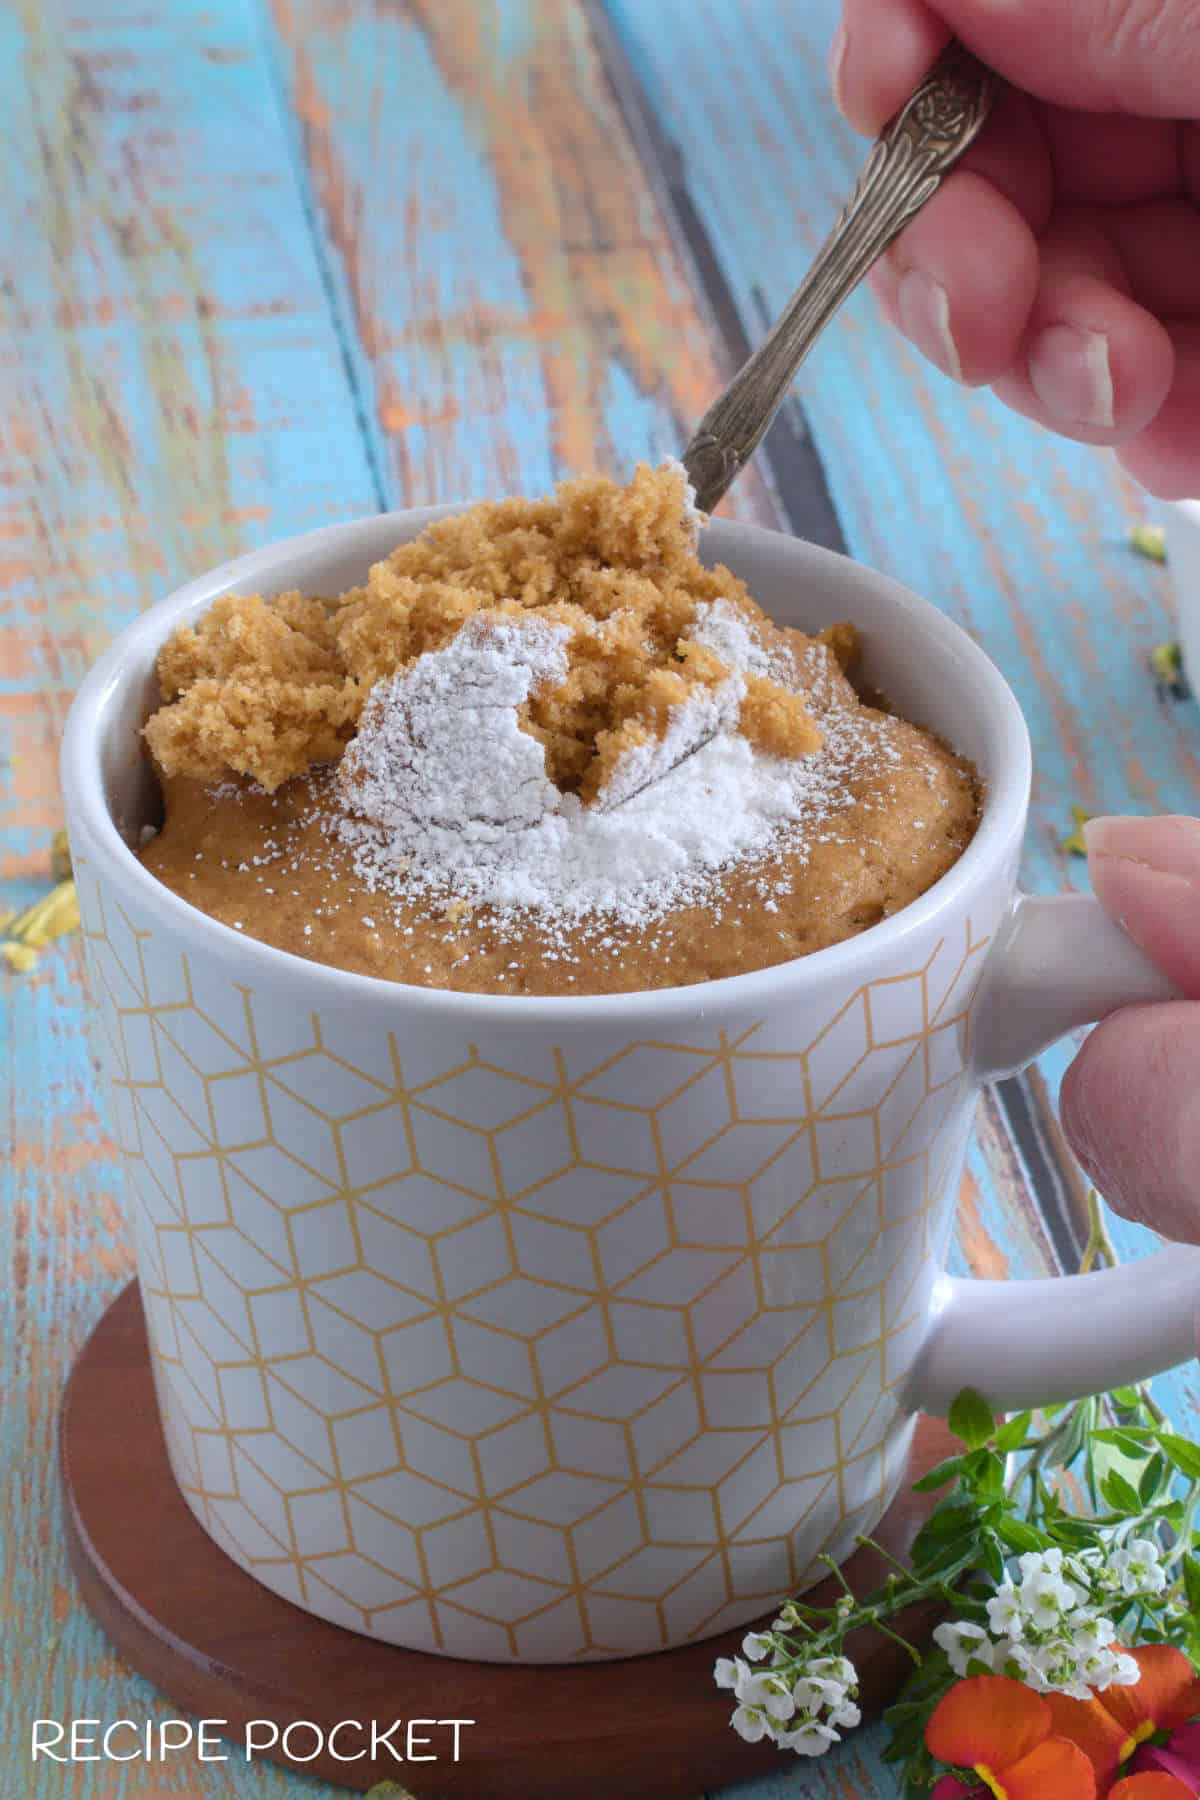 Gingerbread cake being scooped out of a mug.